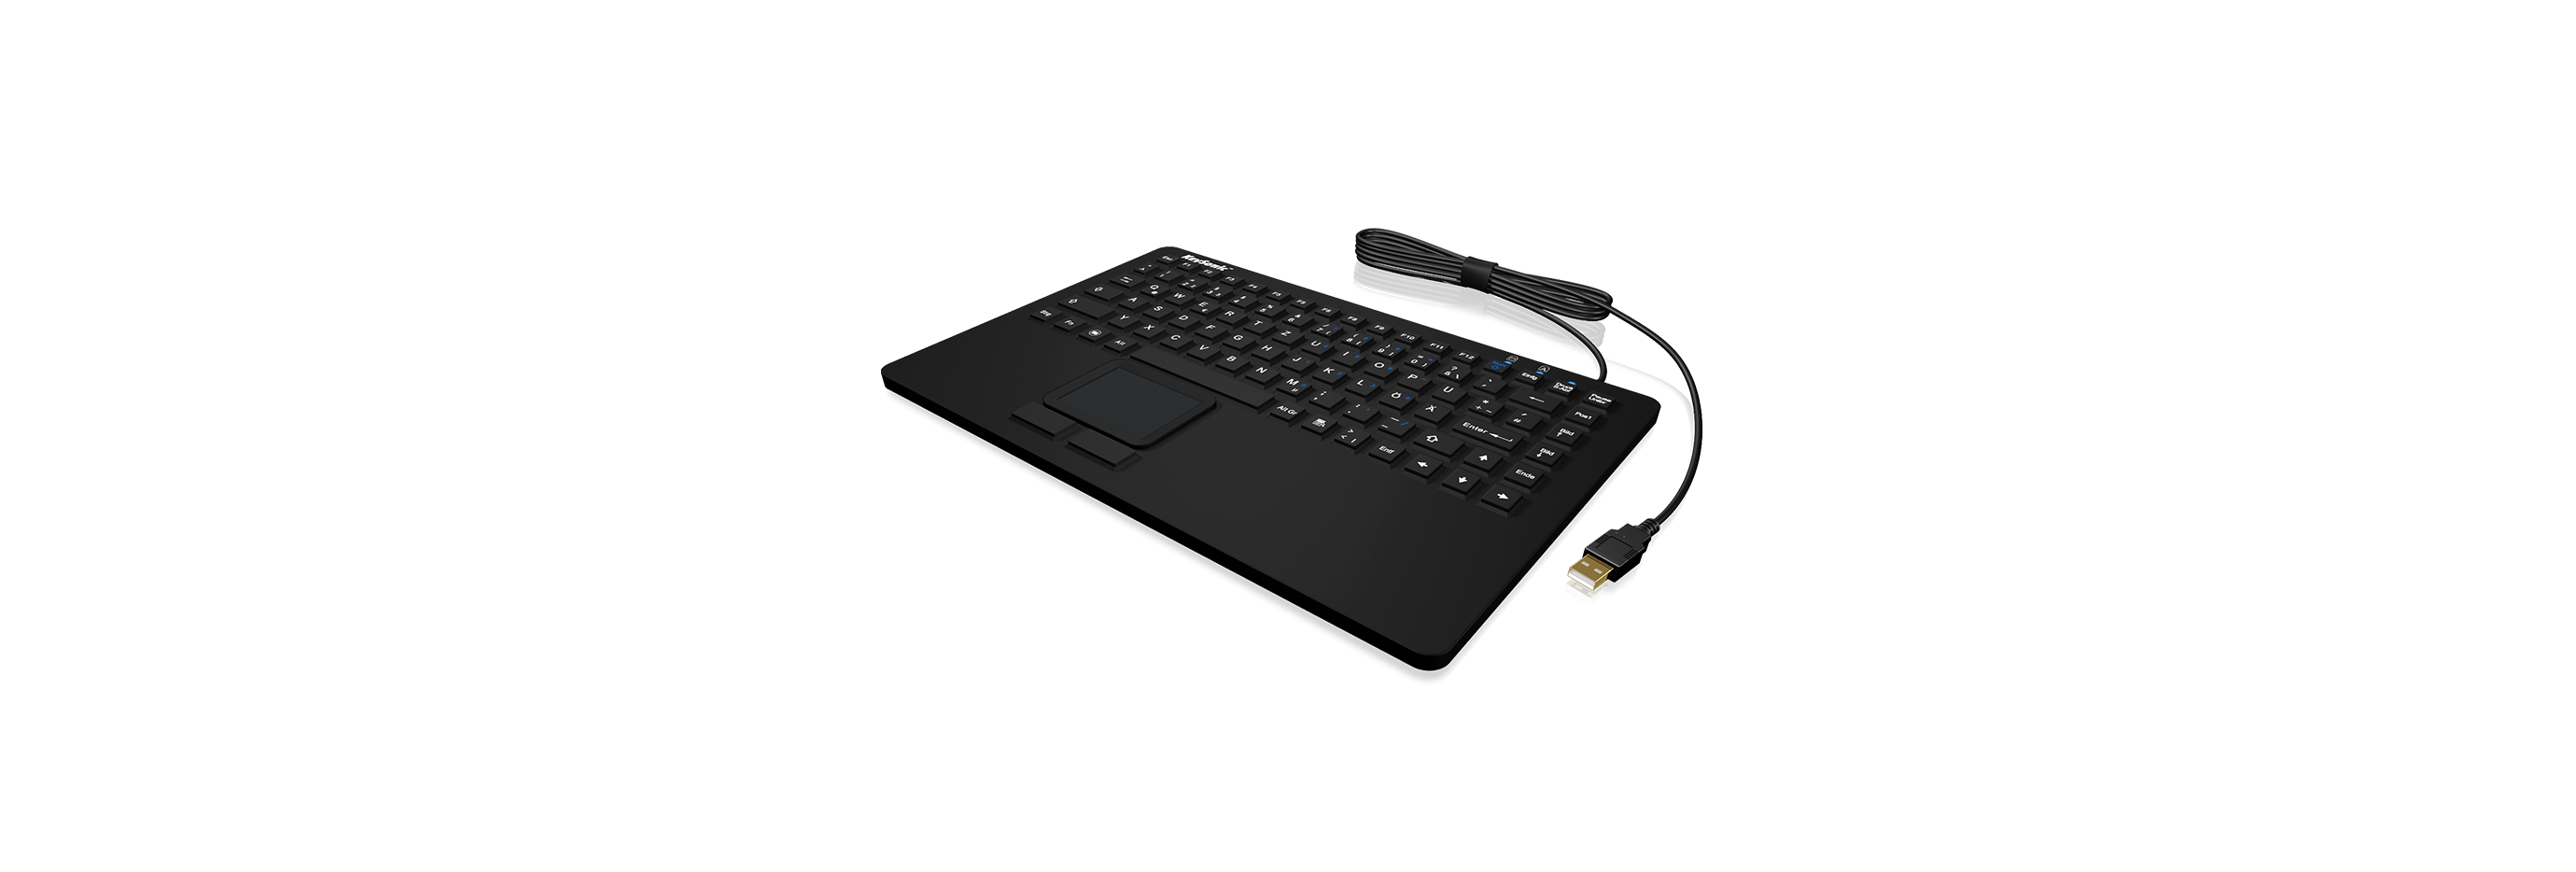 Keyboard with touchpad and 2 mouse buttons